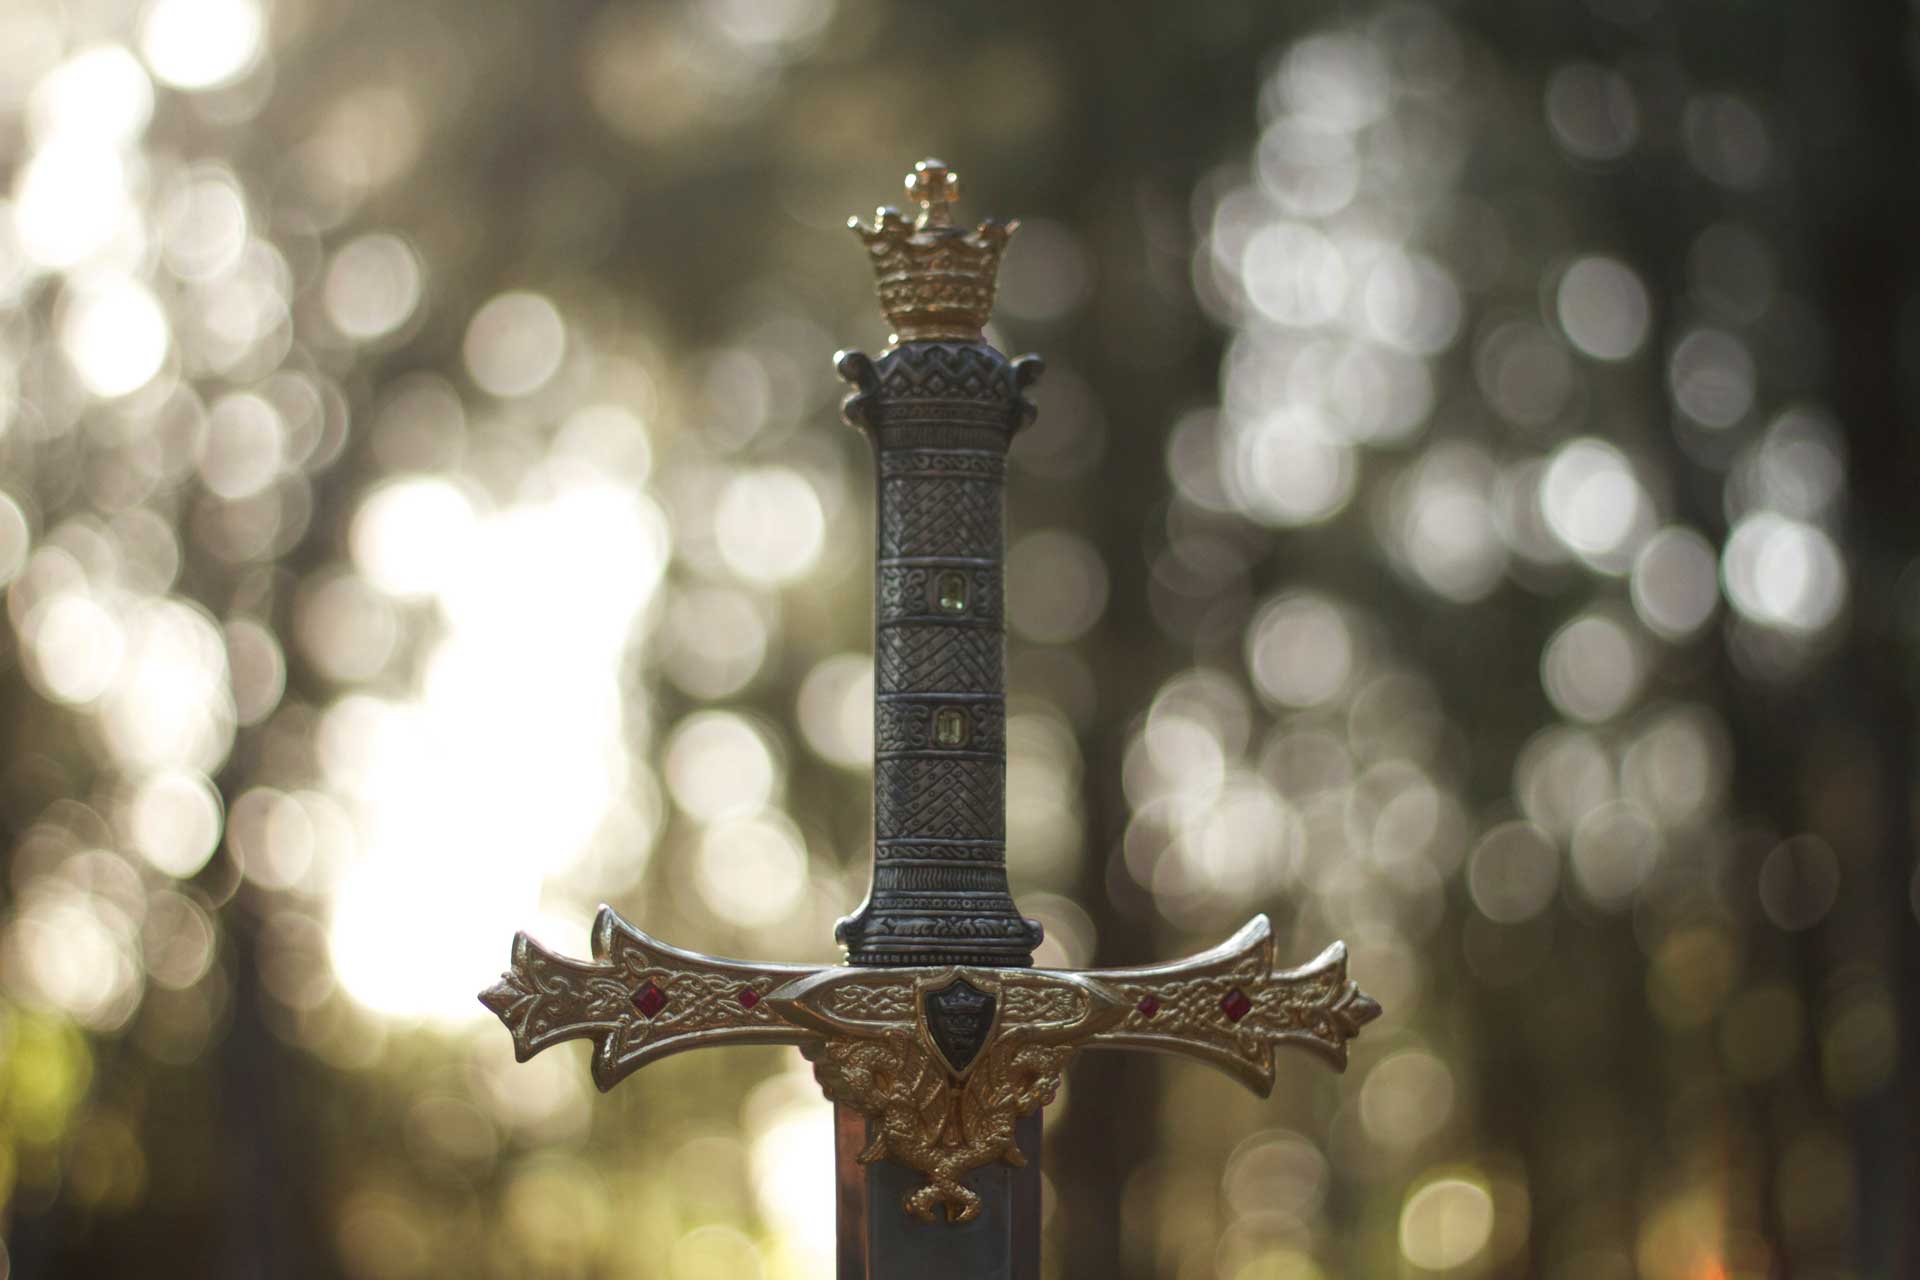 An elegant sword with intricate designs on the hilt stands against a bokeh background, evoking a sense of adventure and timeless legend in a new age product manner.